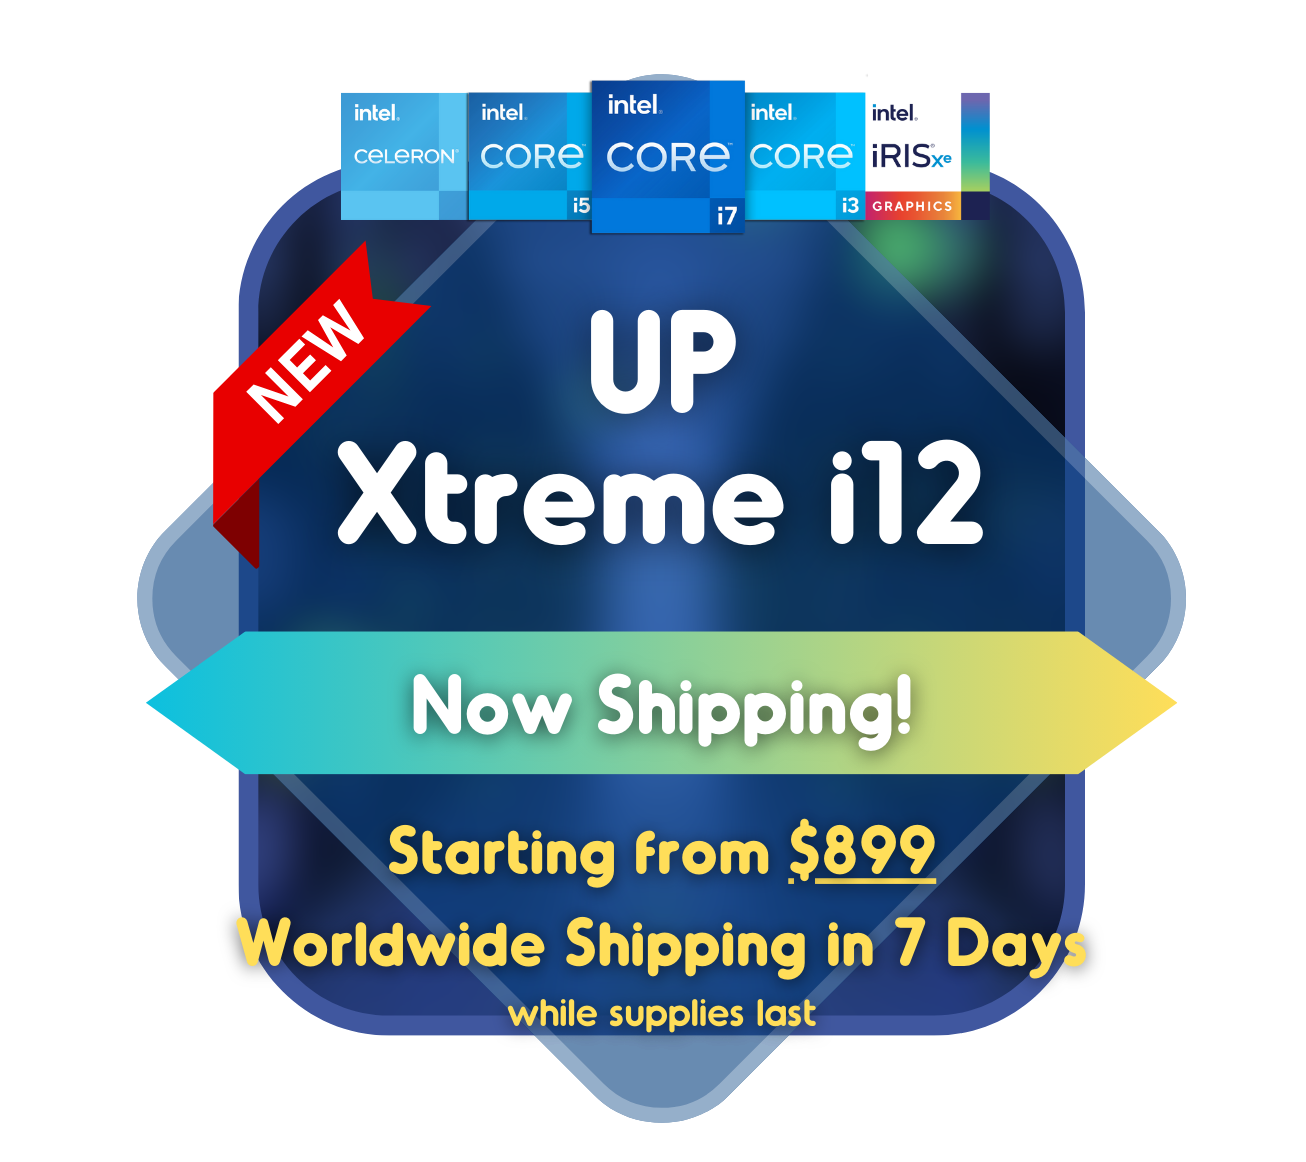 UP Xtreme i12, embedded board processor, price and shipment